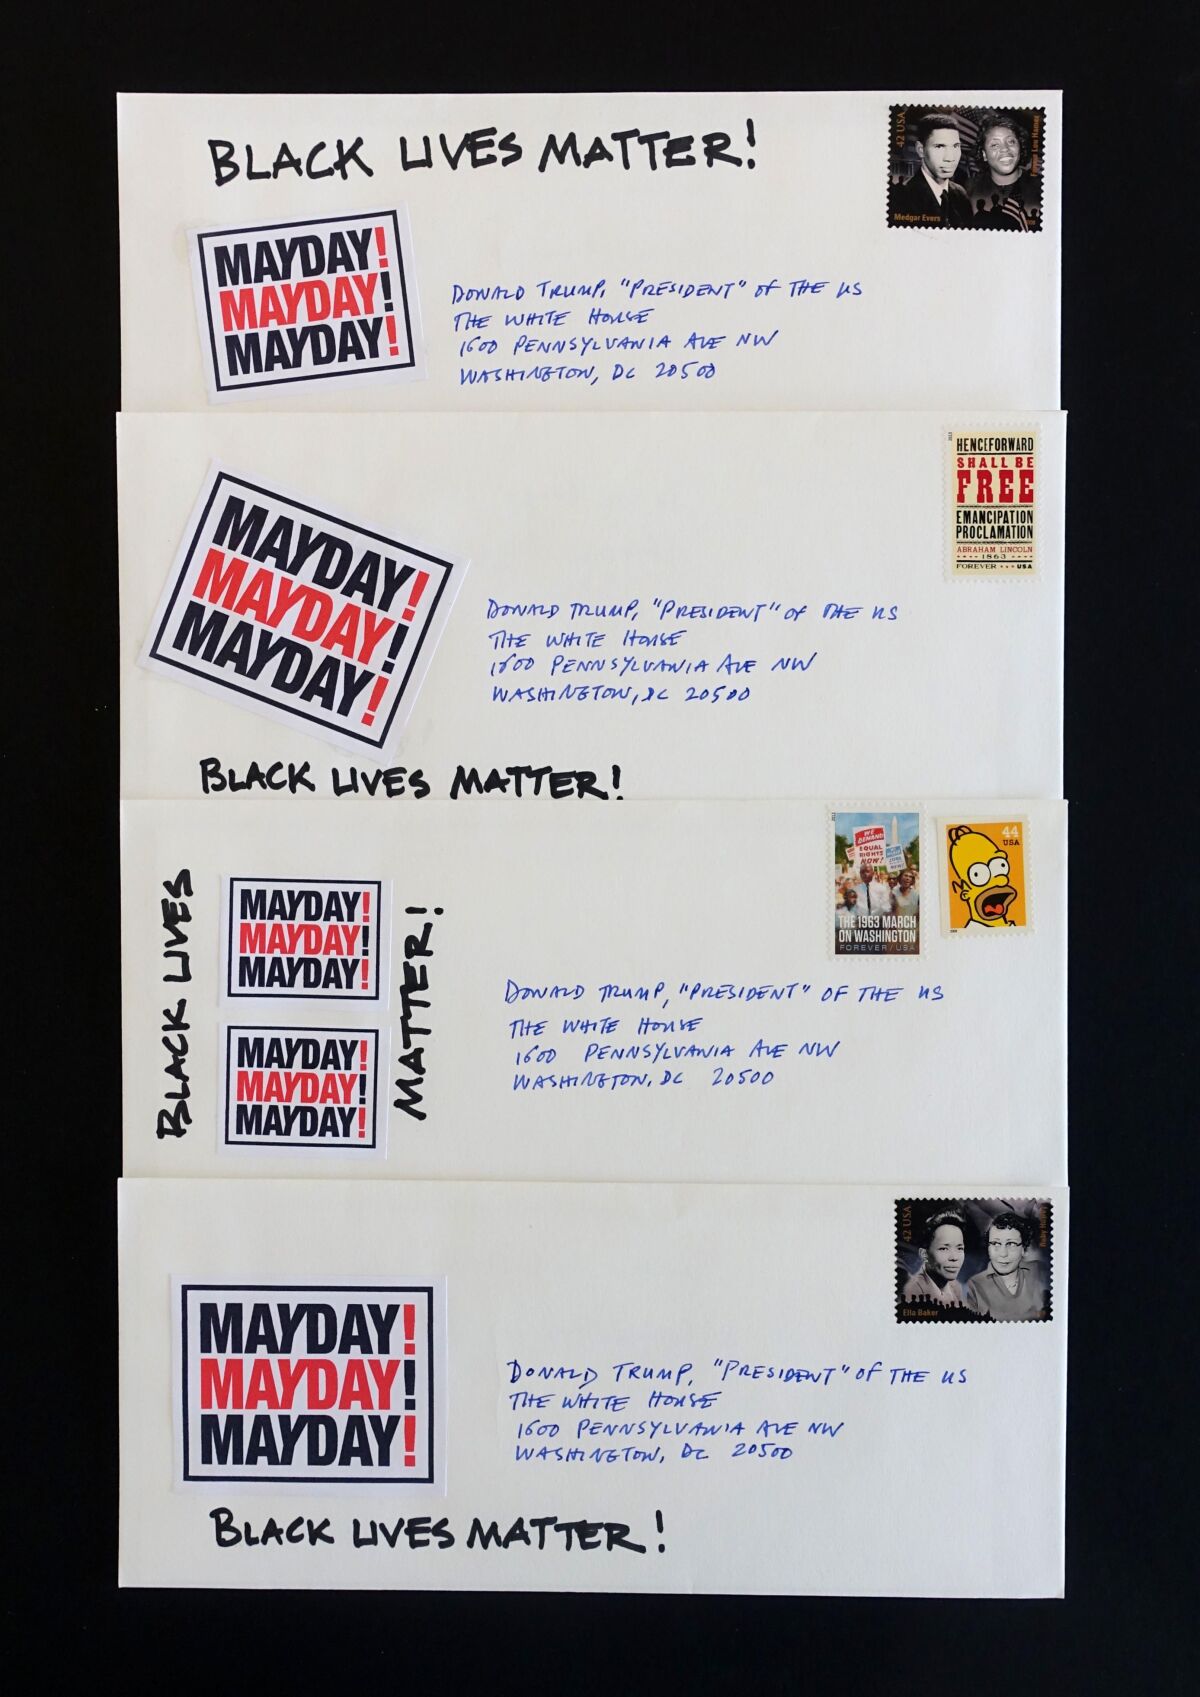 A photograph shows an overhead view of four envelopes addressed to the White House emblazoned with the word "Mayday!"